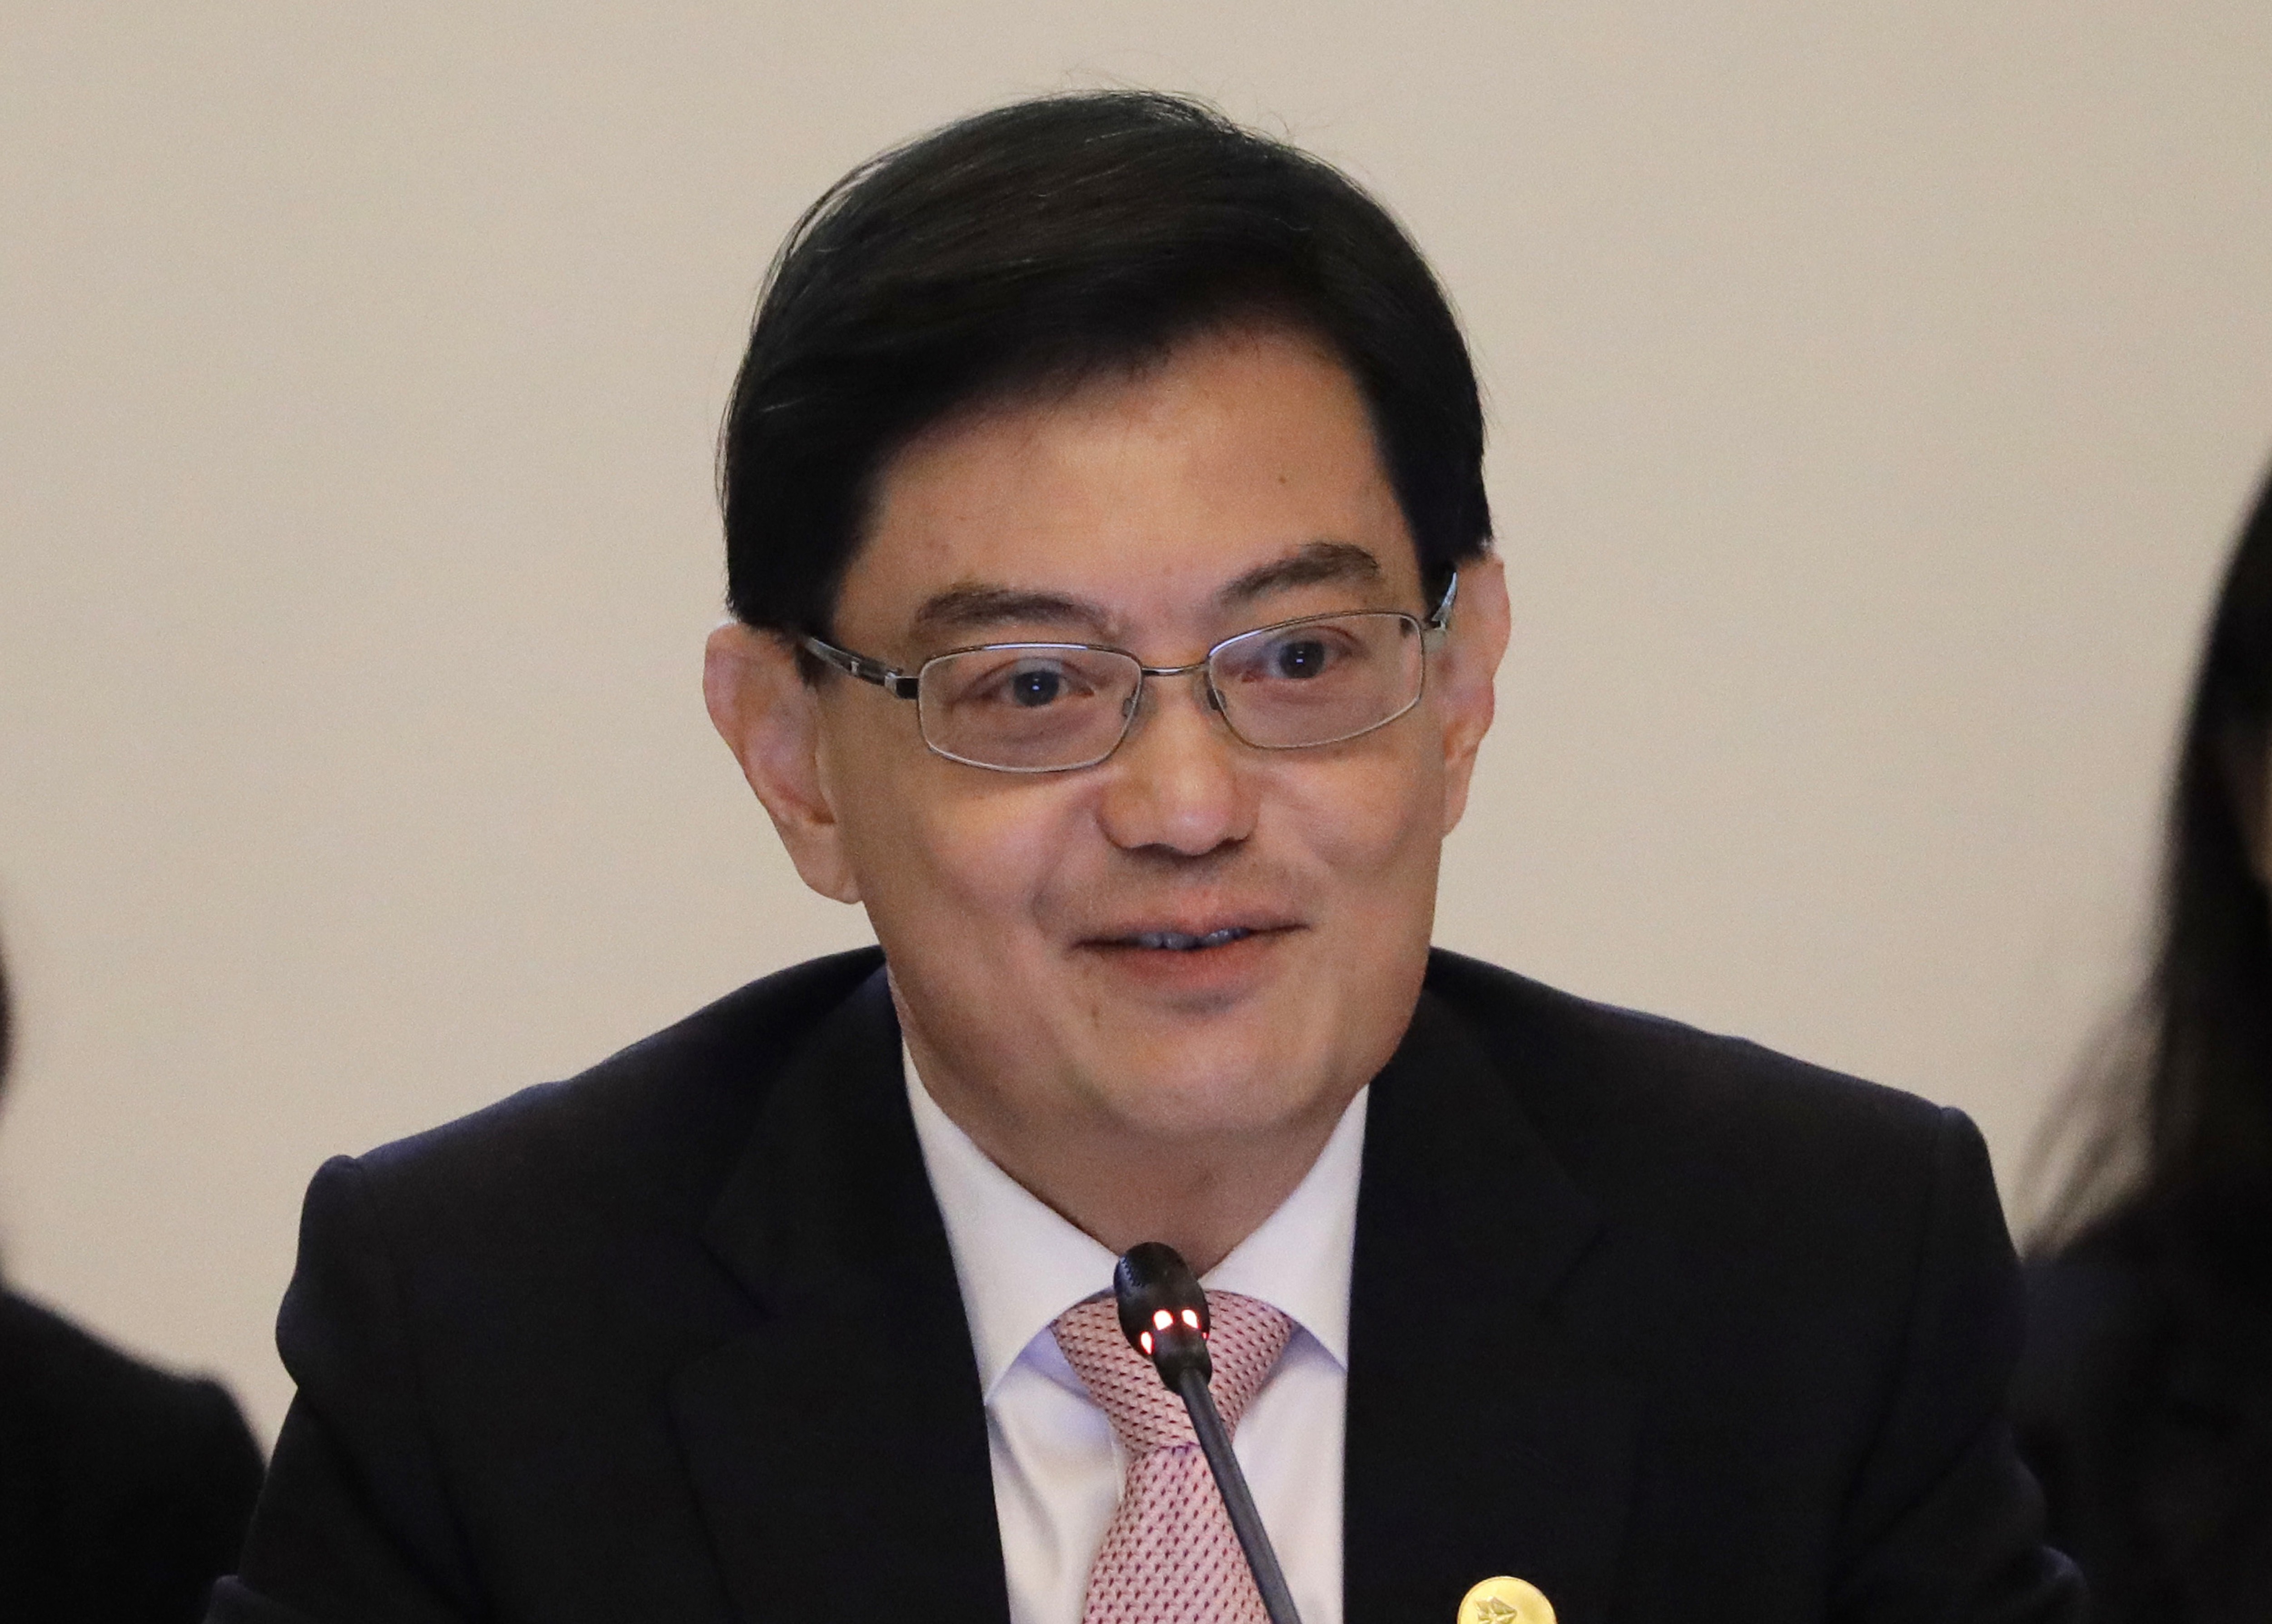 Finance Minister Heng Swee Keat is expected to become Singapore’s next prime minister. Photo: AP